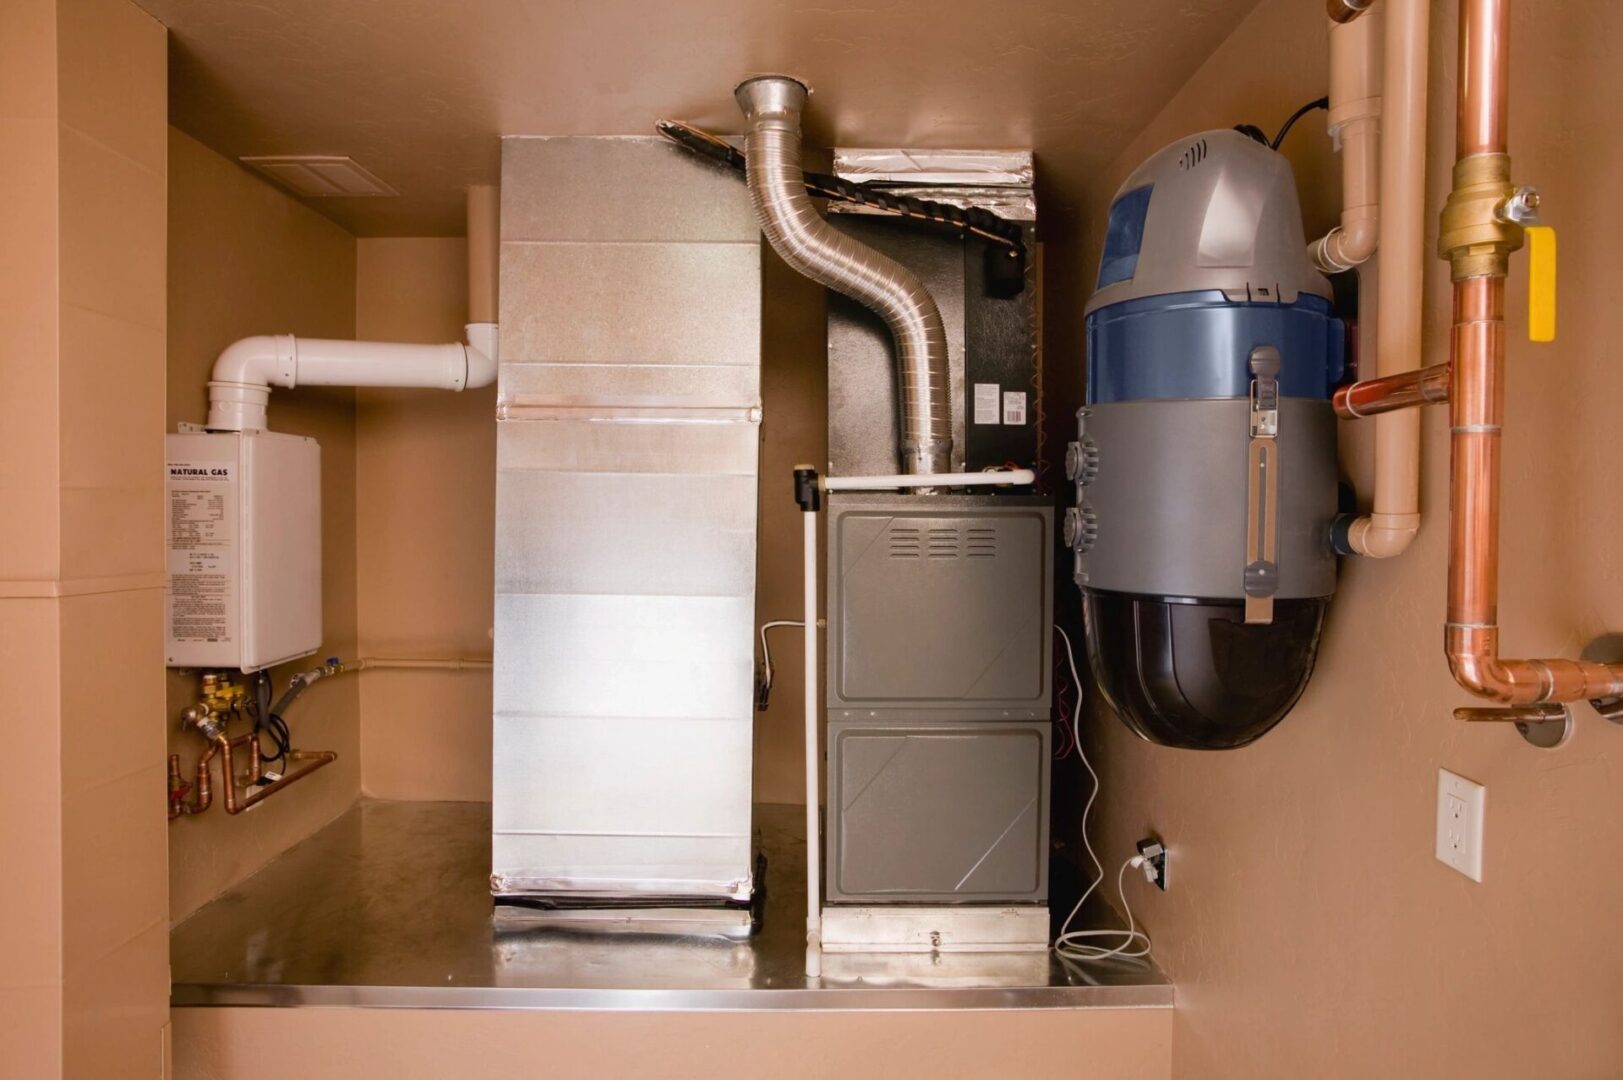 A view of the inside of a home with a gas furnace.